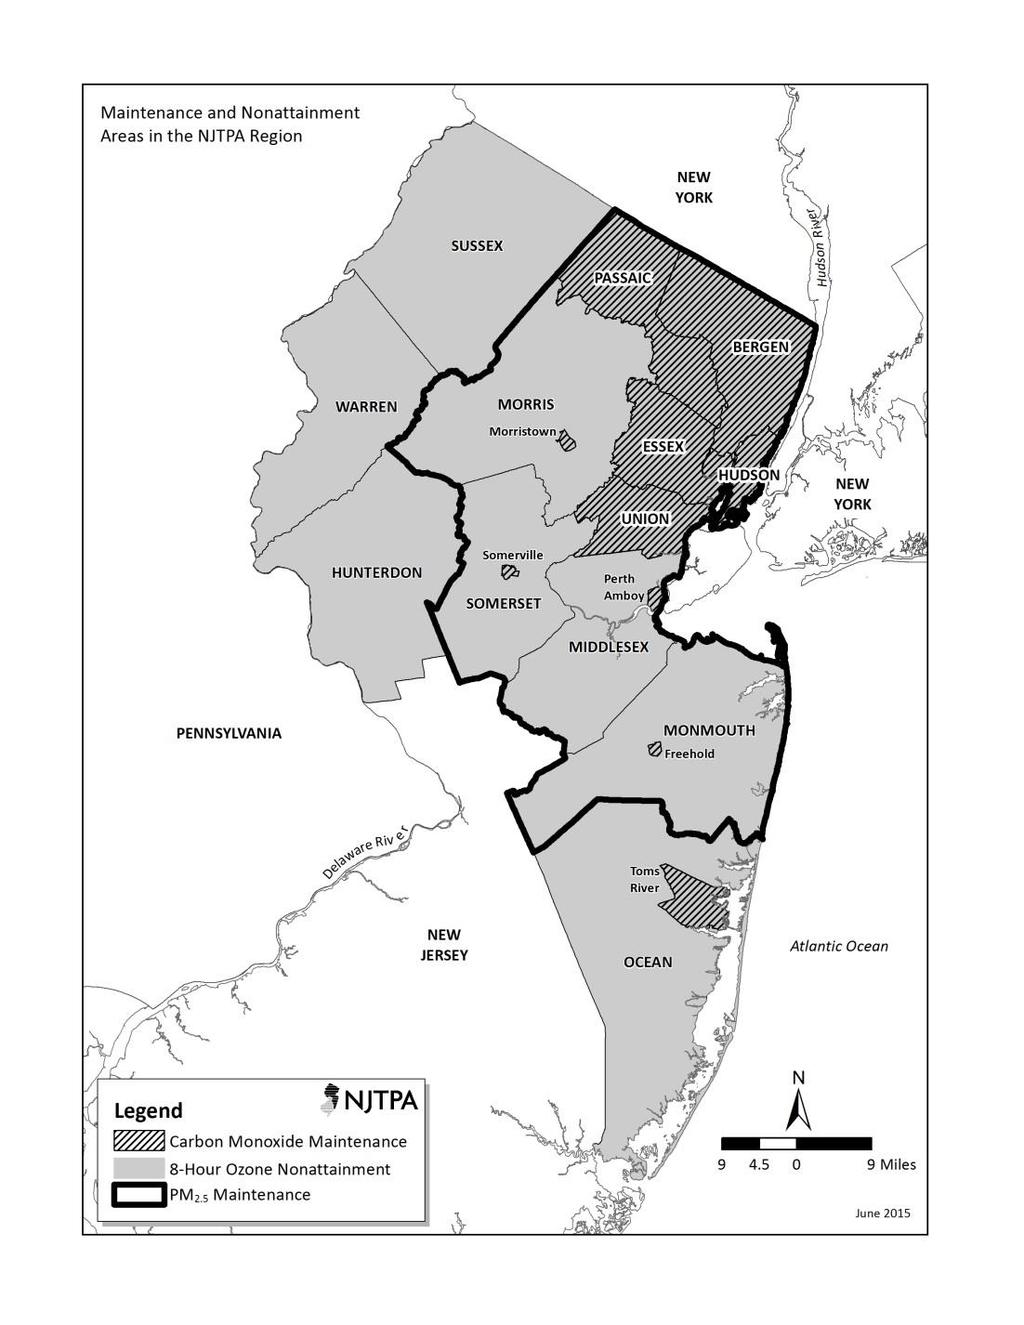 Executive Summary The NJTPA has determined that the Regional Transportation Plan ( Plan 2040 ) and the FY 2016-2019 Transportation Improvement Program for northern New Jersey conform to the State